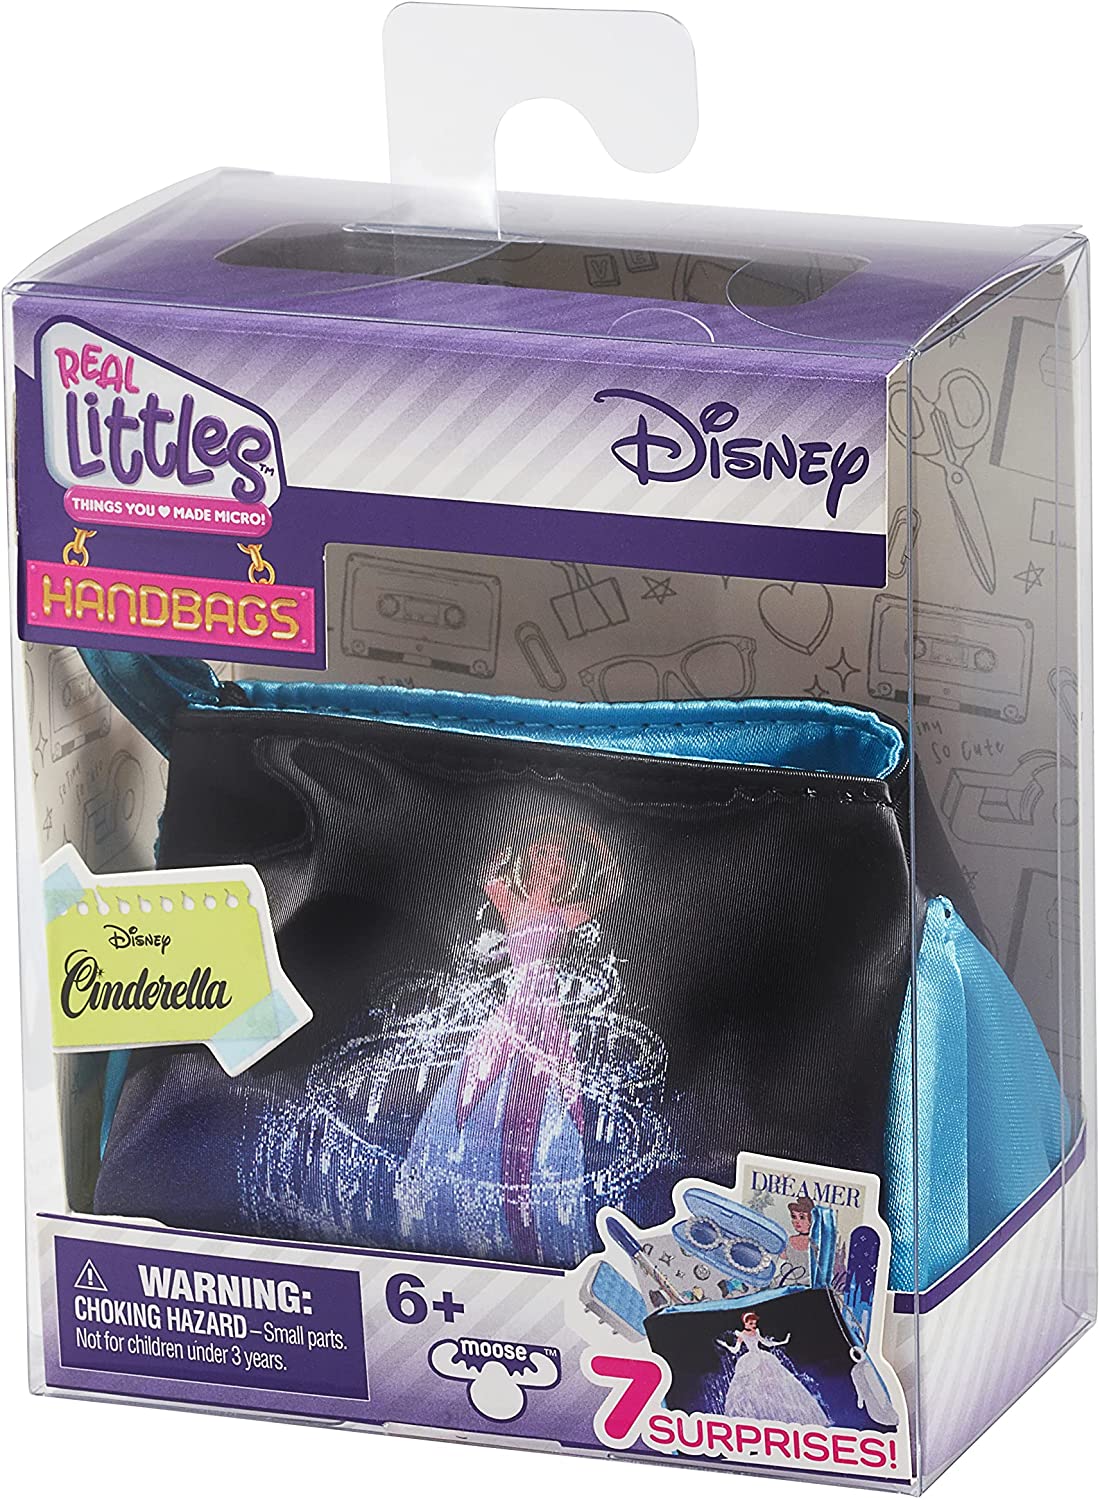 Unboxing Real Littles Disney Backpacks and Handbags! Cheshire Cat!  Tinkerbell! Ursula! Snow White! 